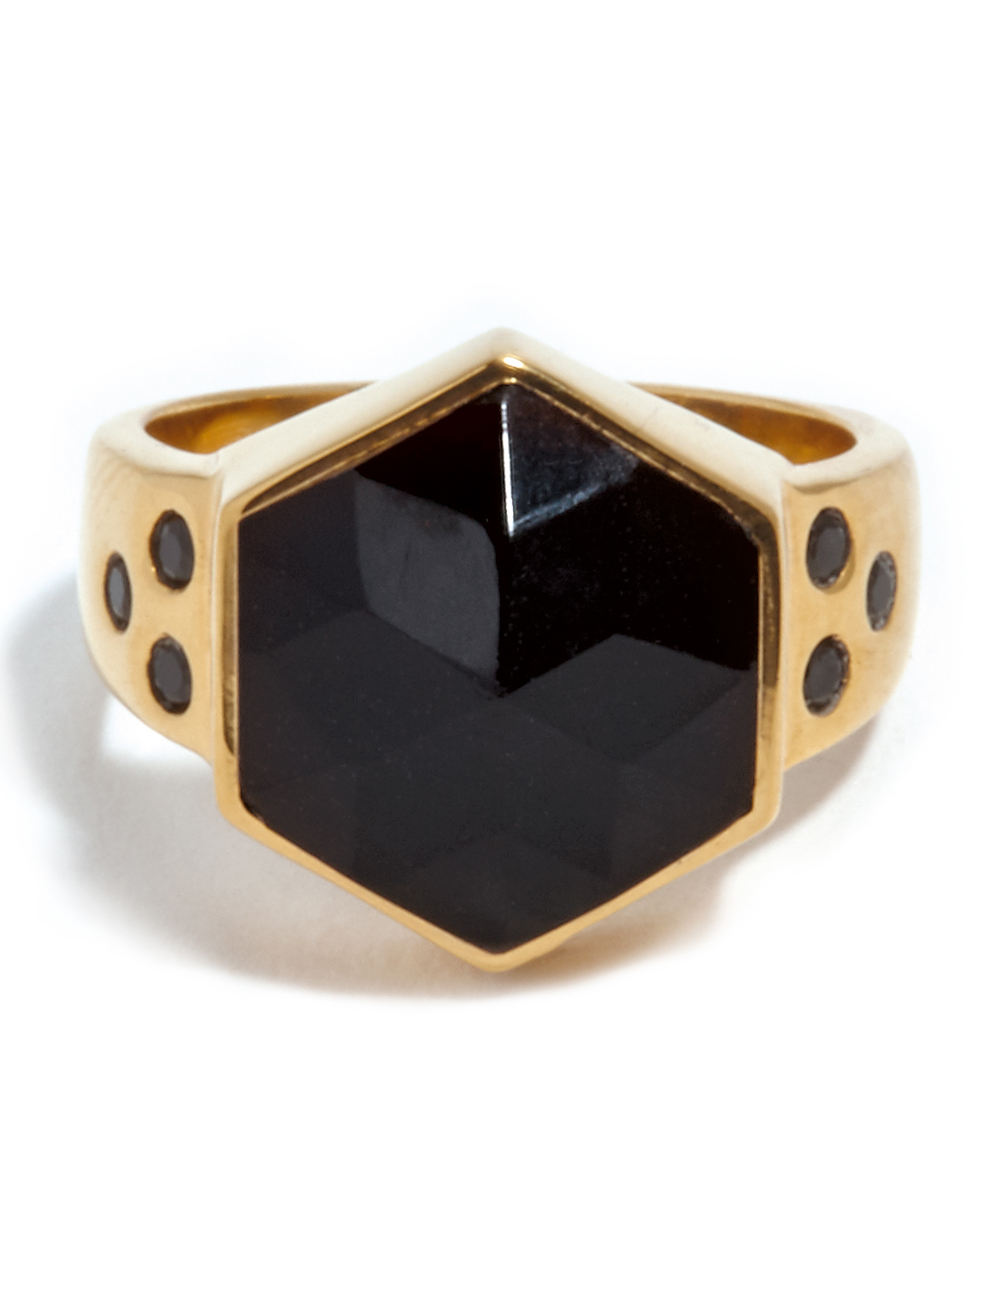 Ring, $249, by Cathy Pope.